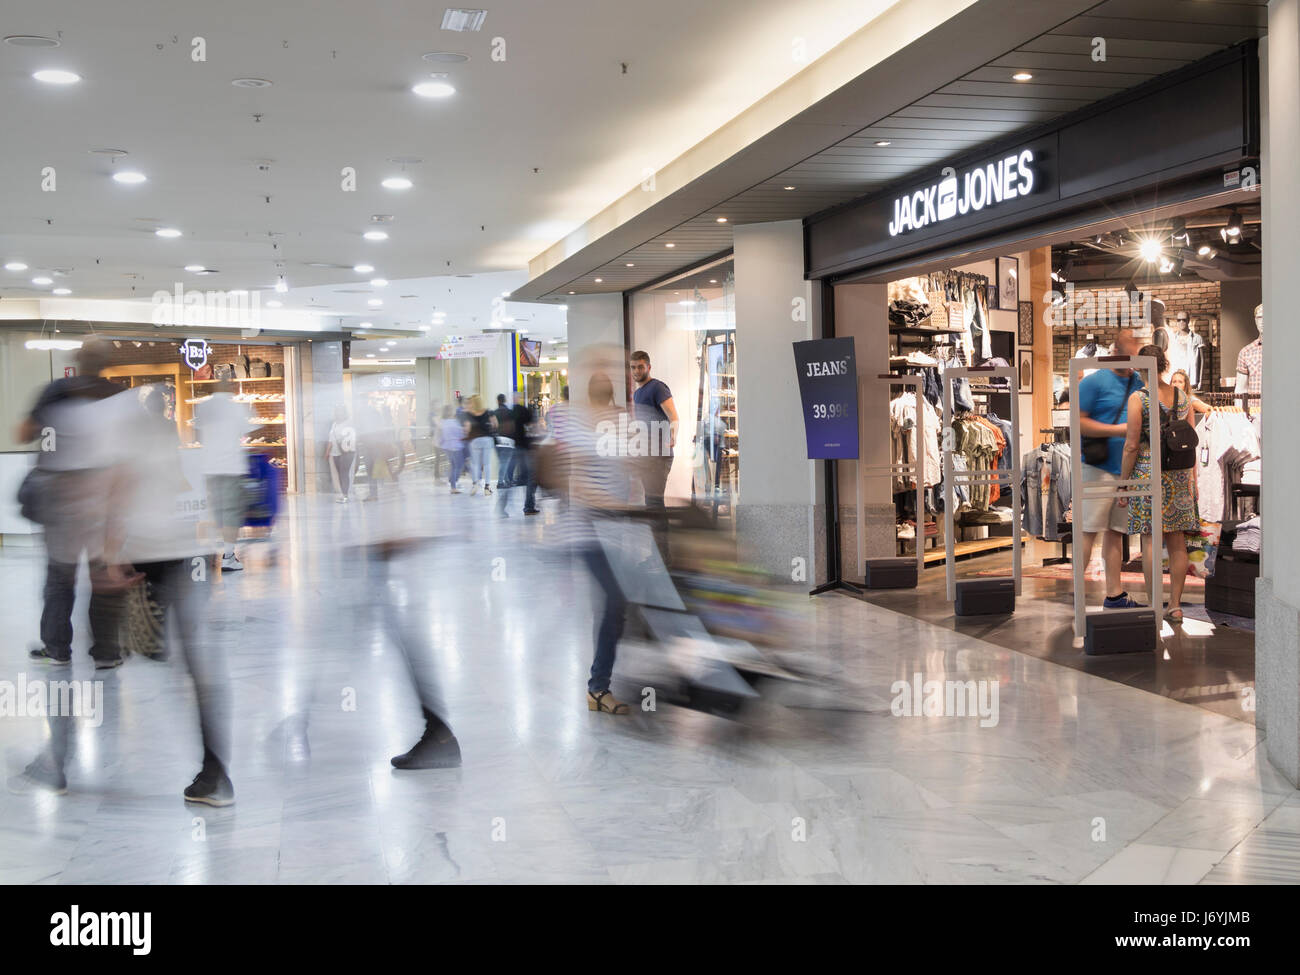 Jack & Jones clothing store in shopping mall in Spain Stock Photo - Alamy